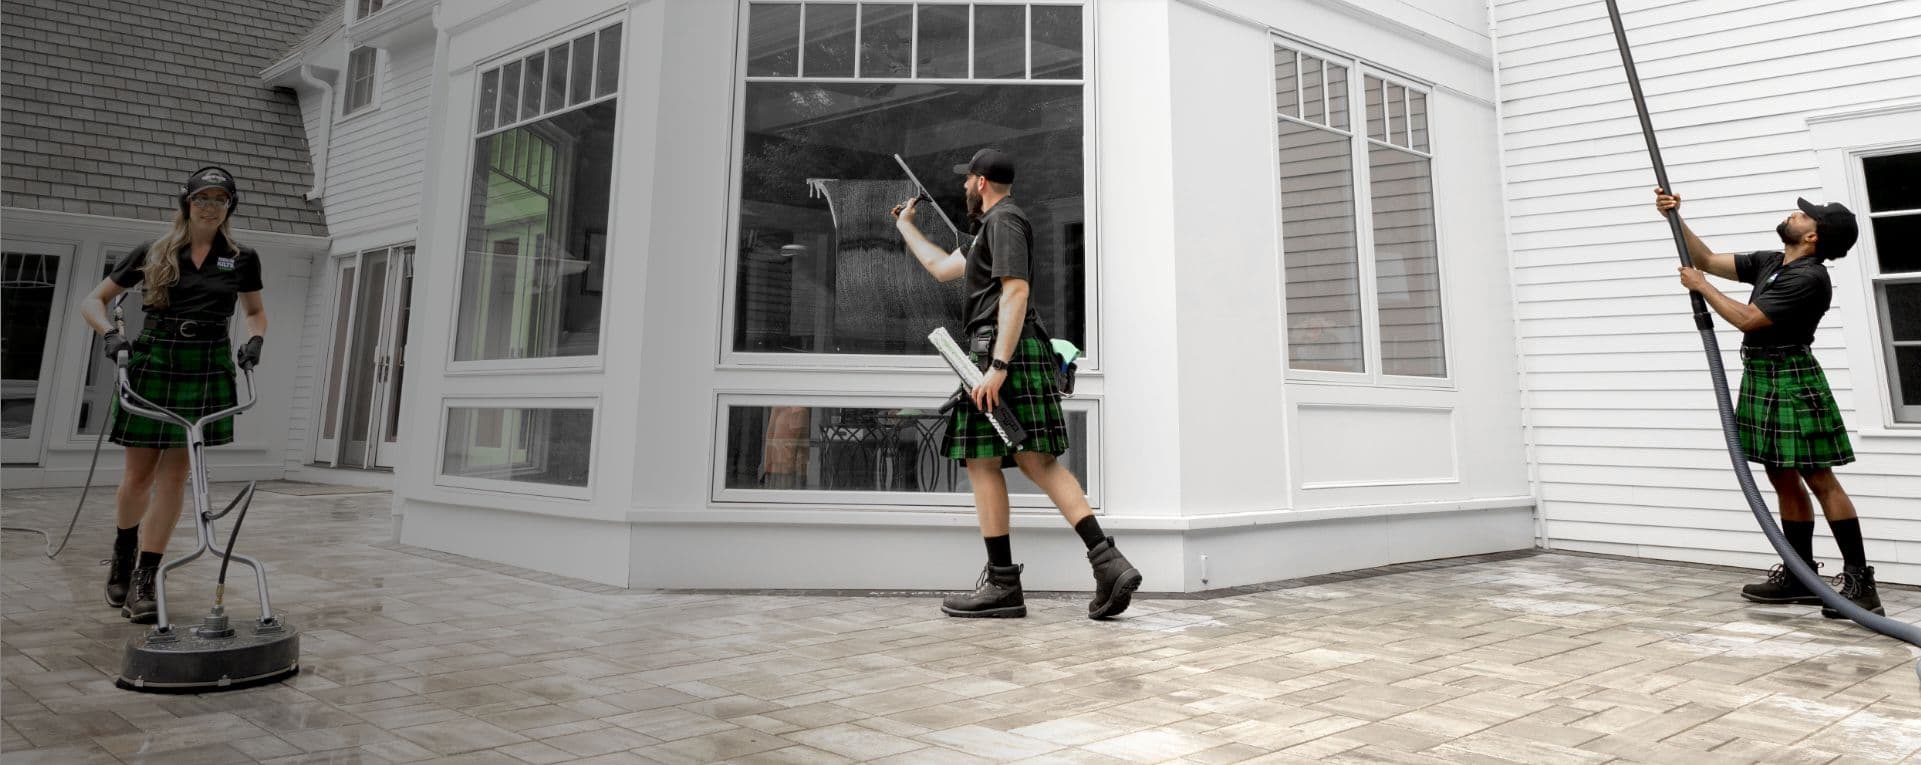 Window Cleaning and More Men In Kilts